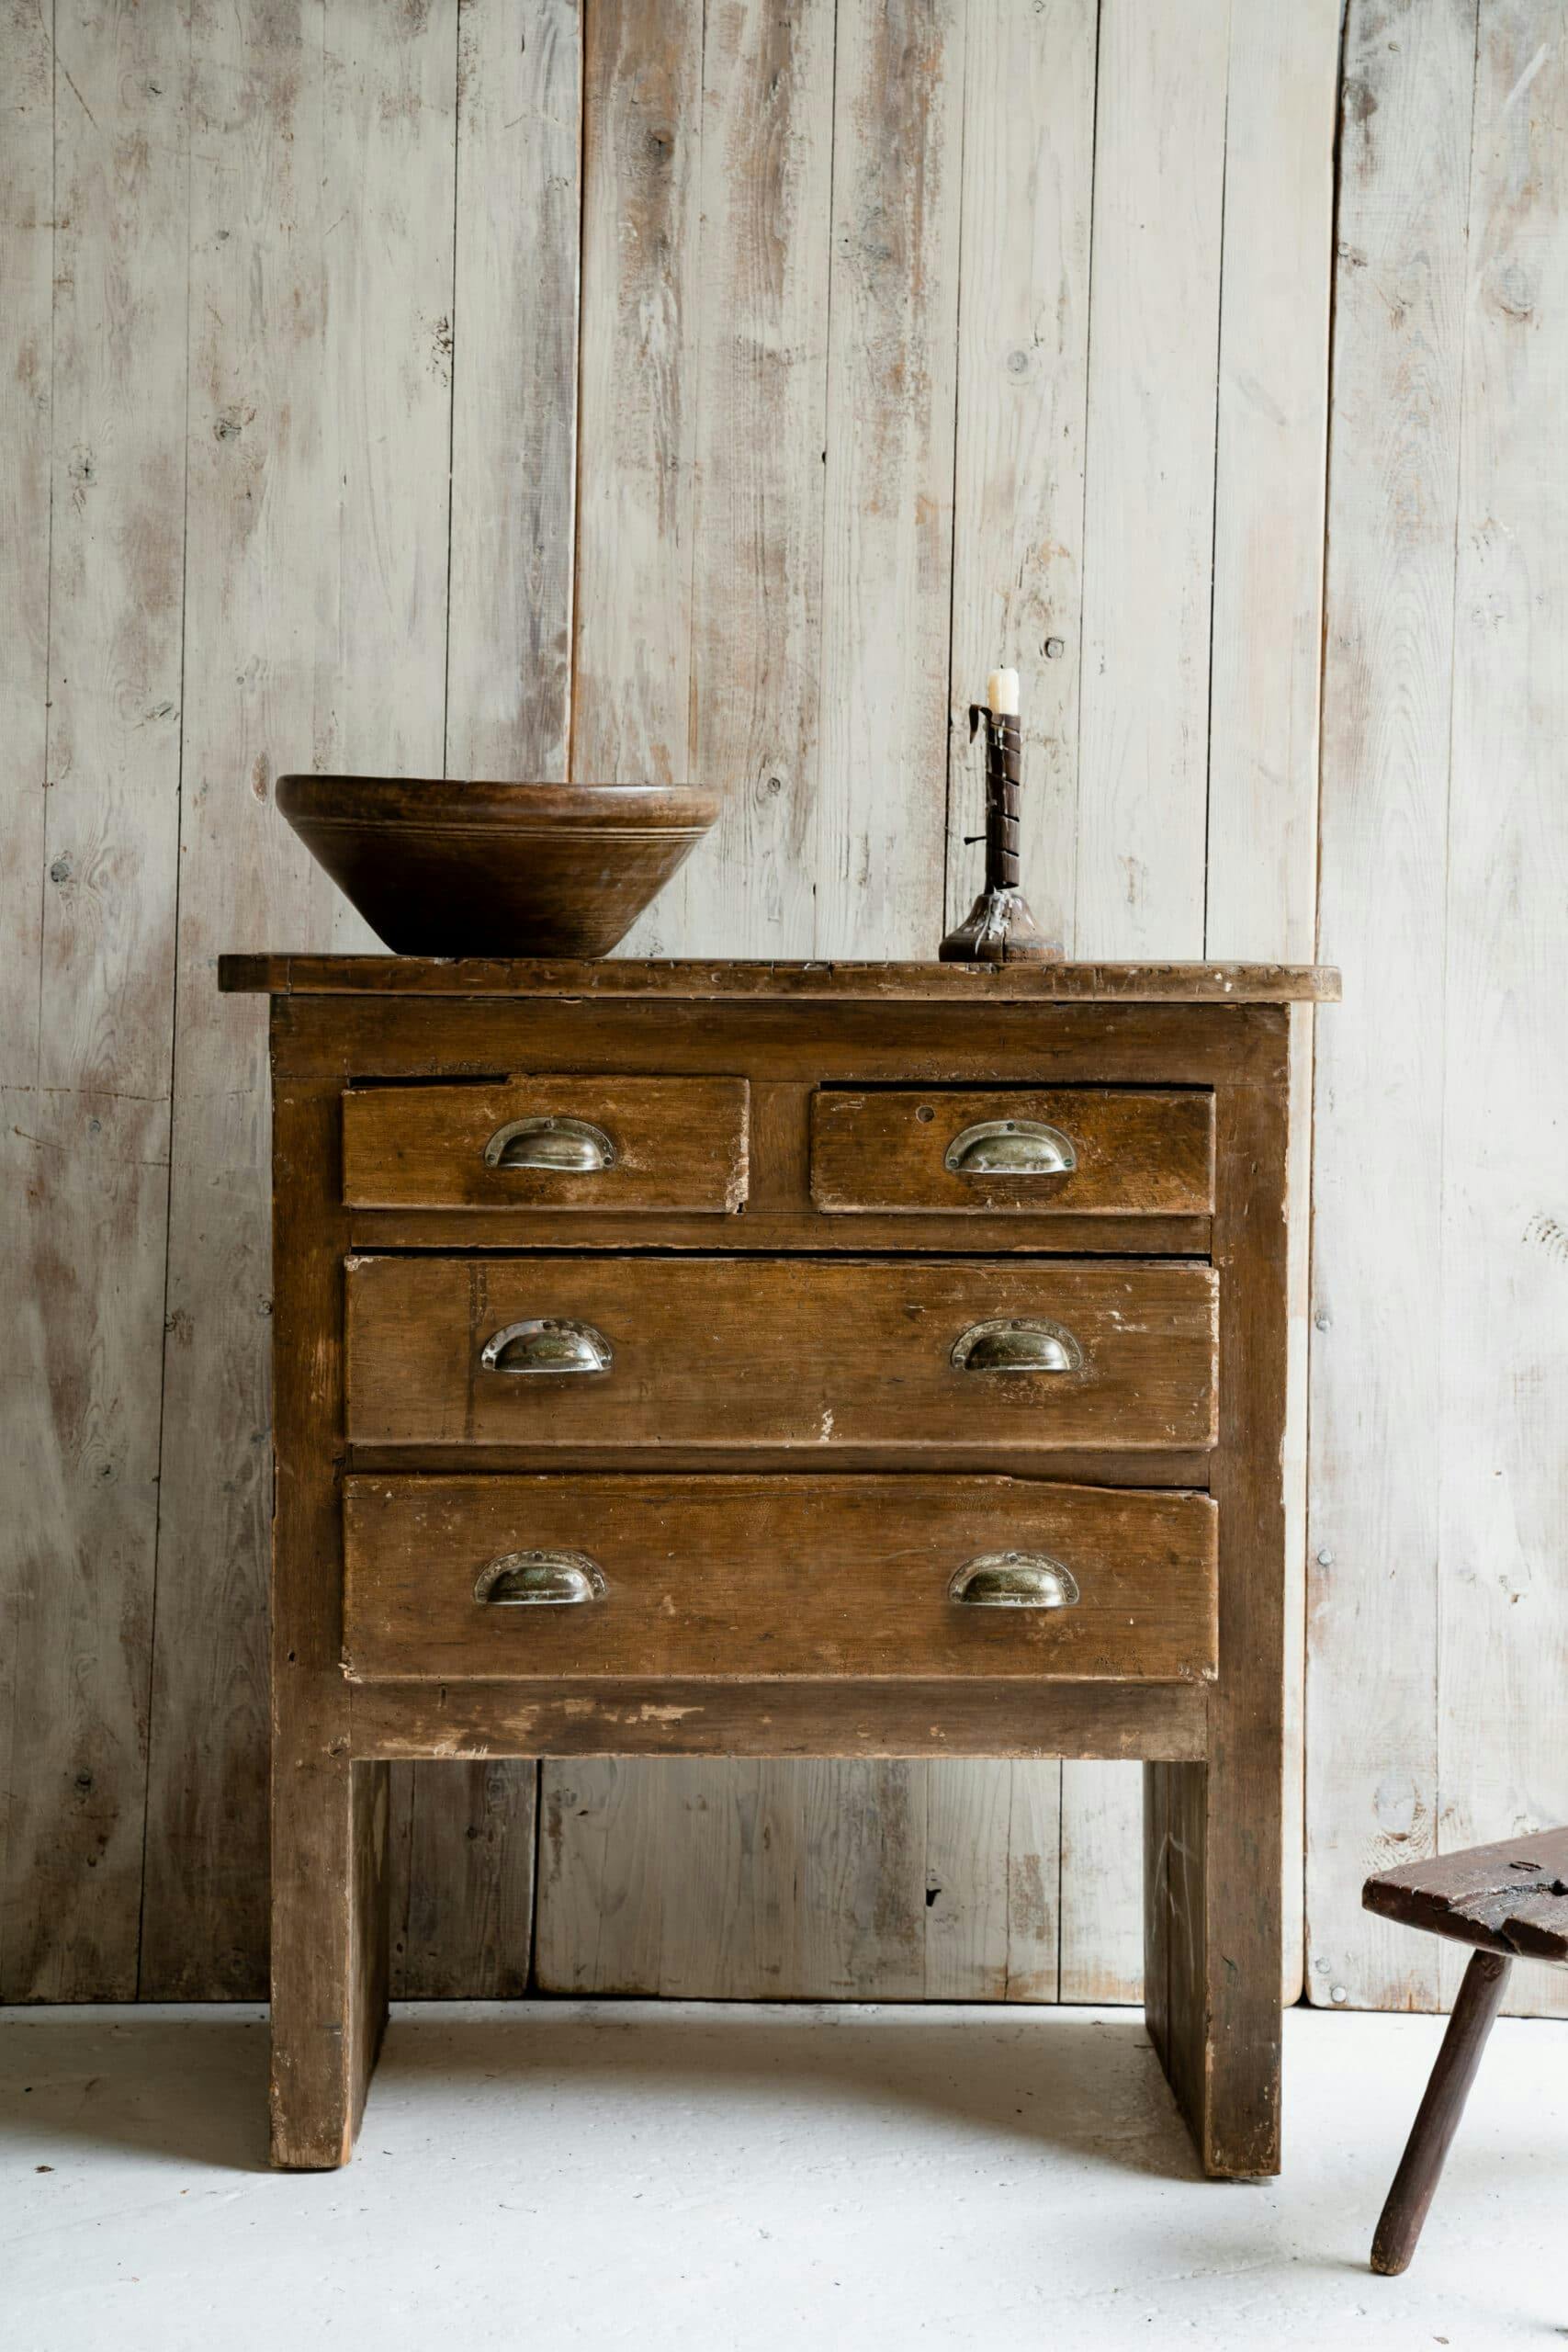 A Utilitarian Vintage Workshop Chest of Drawers